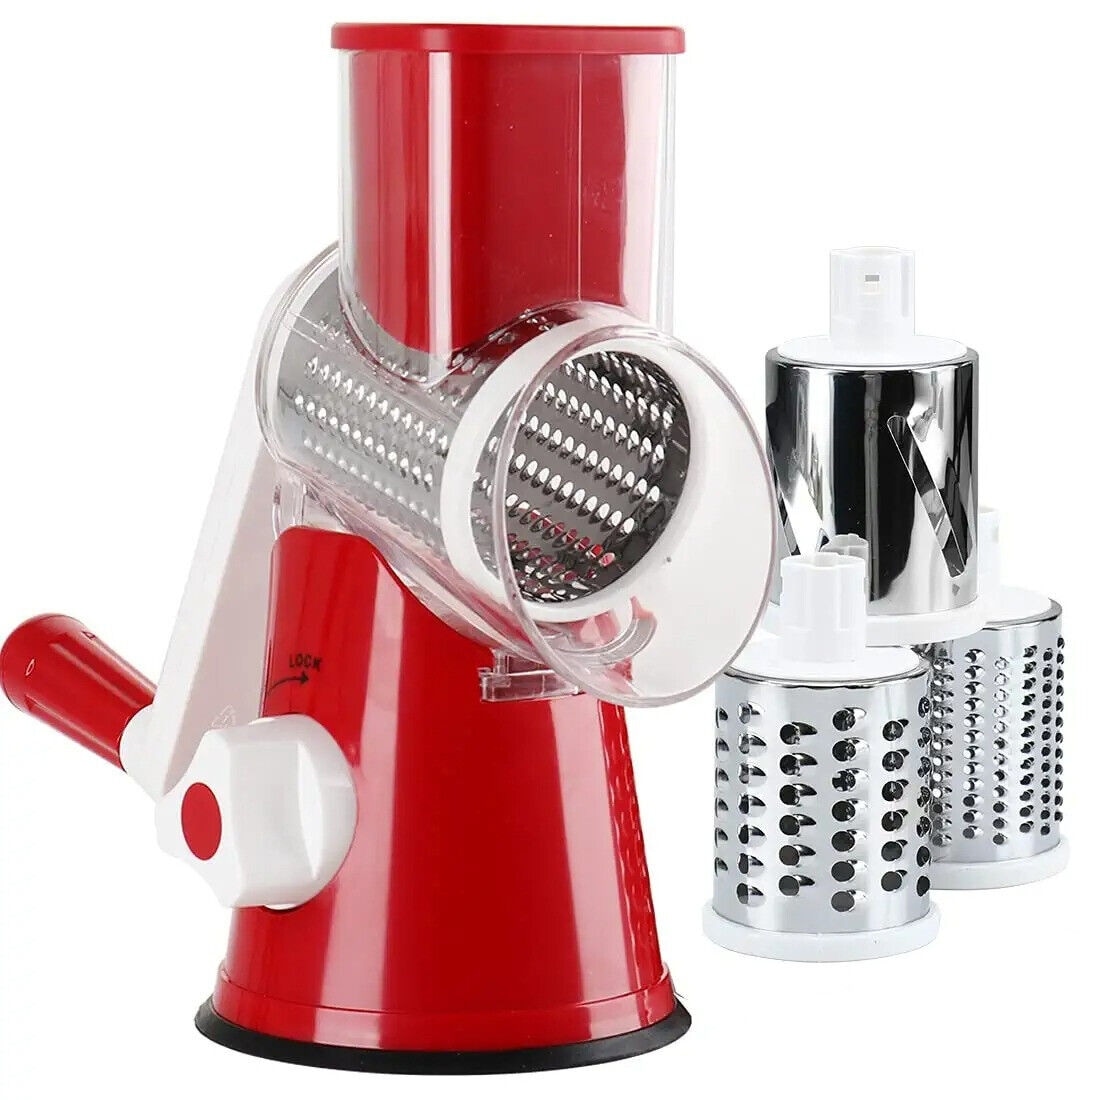 https://ak1.ostkcdn.com/images/products/is/images/direct/facf6259ca6889fa633abc3c99b3c546874539c8/3-in-1-Rotary-Drum-Slicer-for-Vegetable-Veggie.jpg